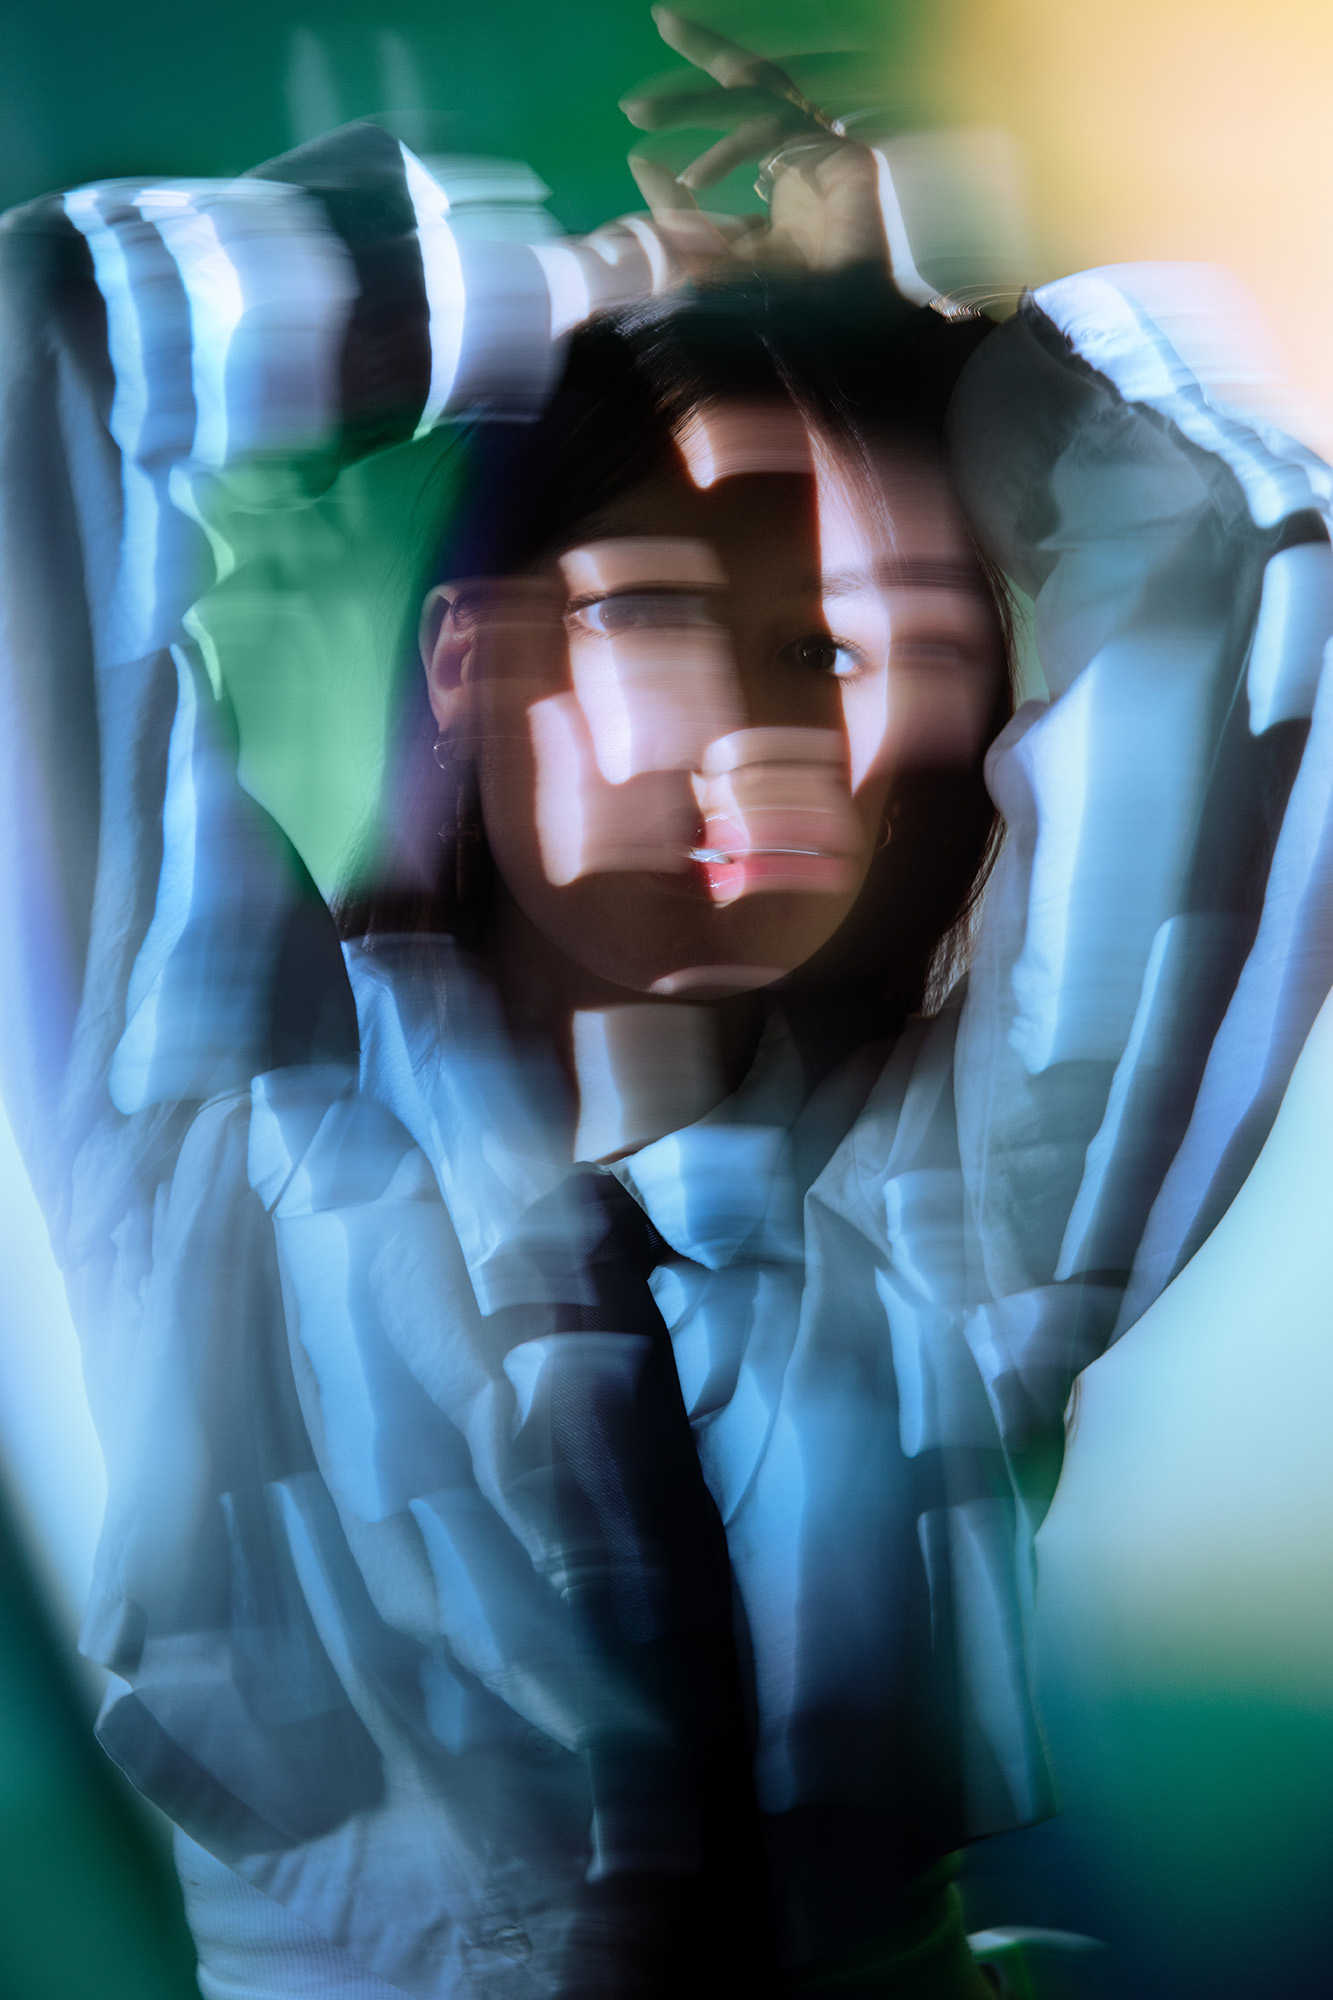 Photography work by Ruby Williams showing a colourful obscured portrait